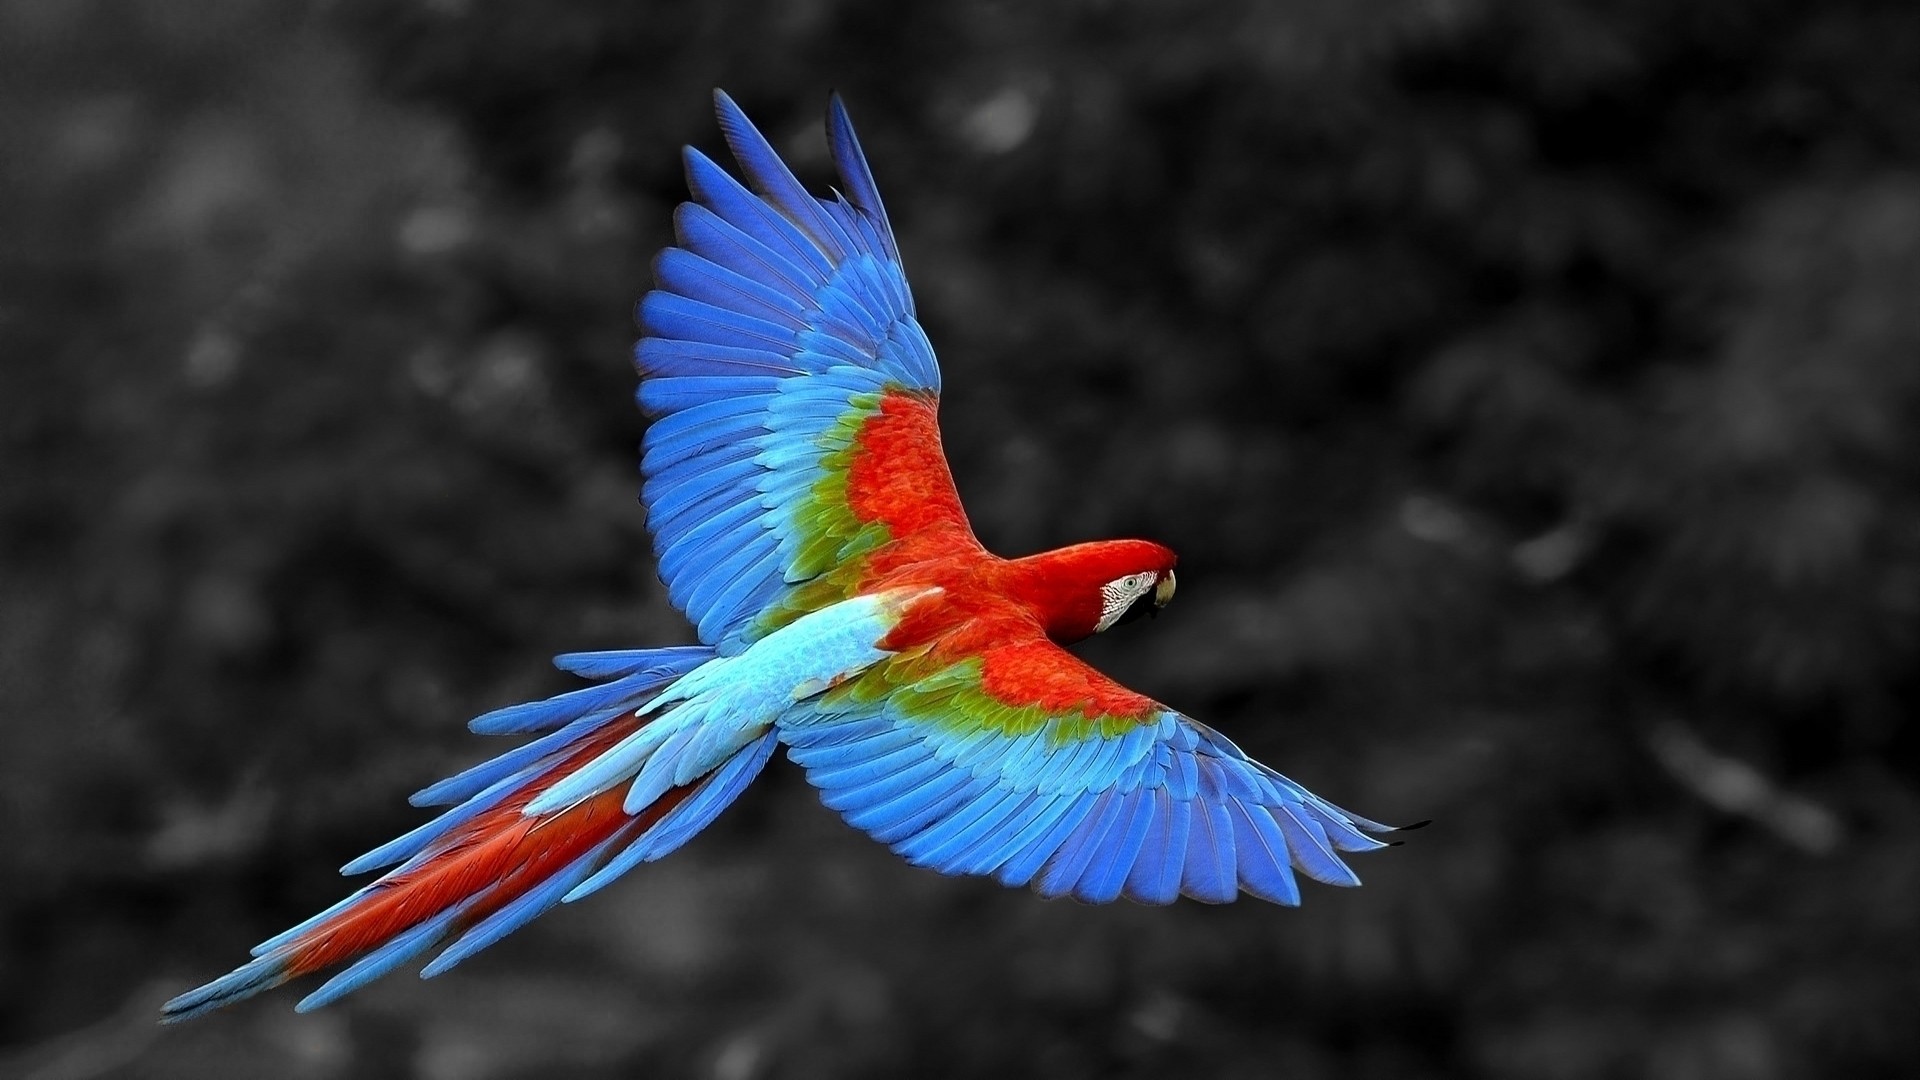 1920x1080 ... Colorful Macaw Parrot Wallpaper. Colorful Parrot Bird HD Animals Flying  ...